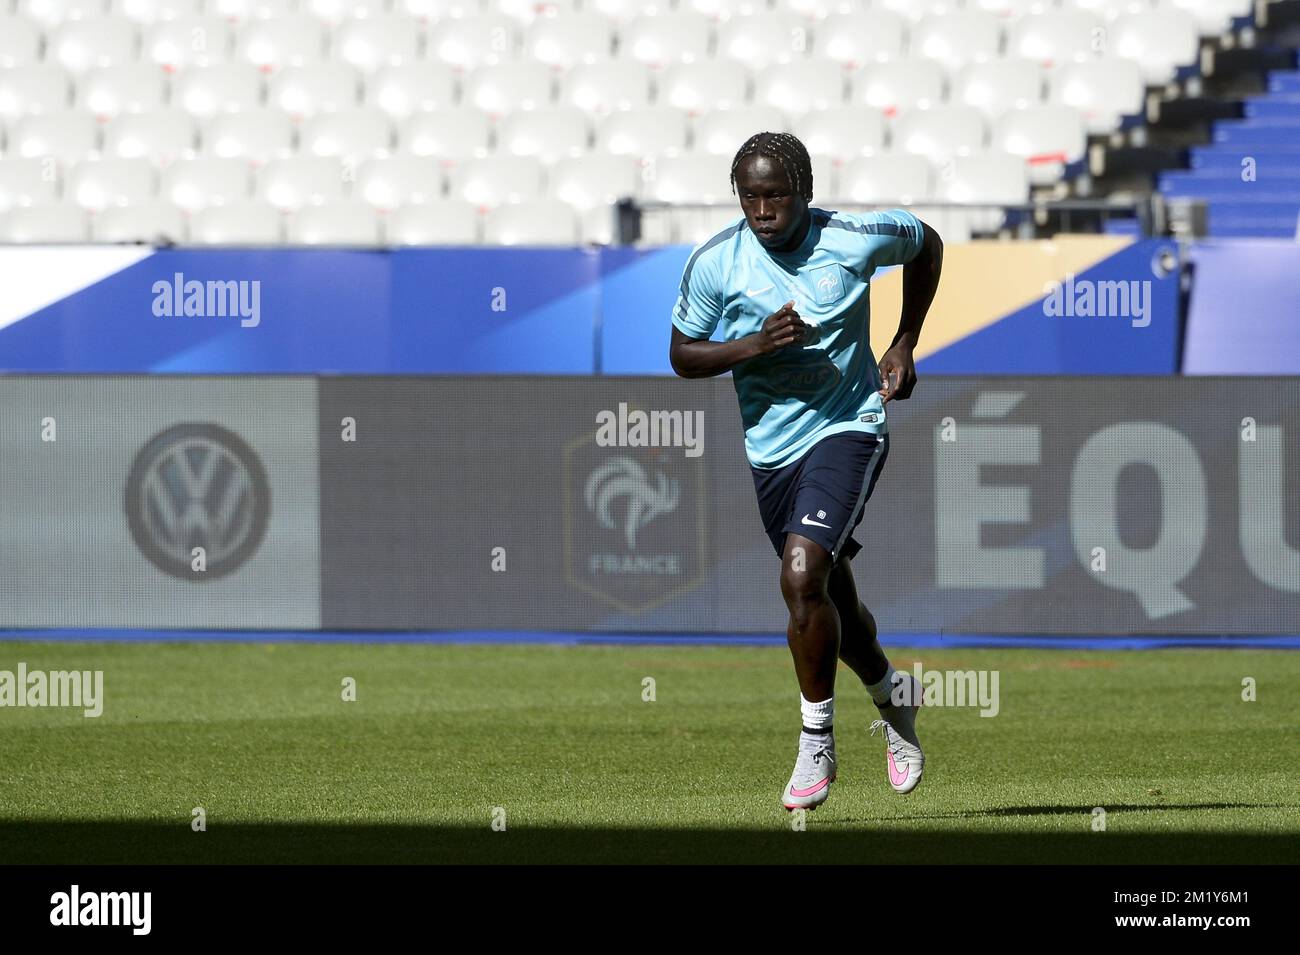 20150606 - PARIS, FRANCE: France's defender Bacary Sagna pictured at a training session in the 'Stade de France' in Paris, ahead of the friendly game tomorrow against France, Saturday 06 June 2015. The Devils are preparing for a friendly game against France tomorrow and a Euro 2016 qualification game against Wales on Friday. BELGA PHOTO DIRK WAEM Stock Photo